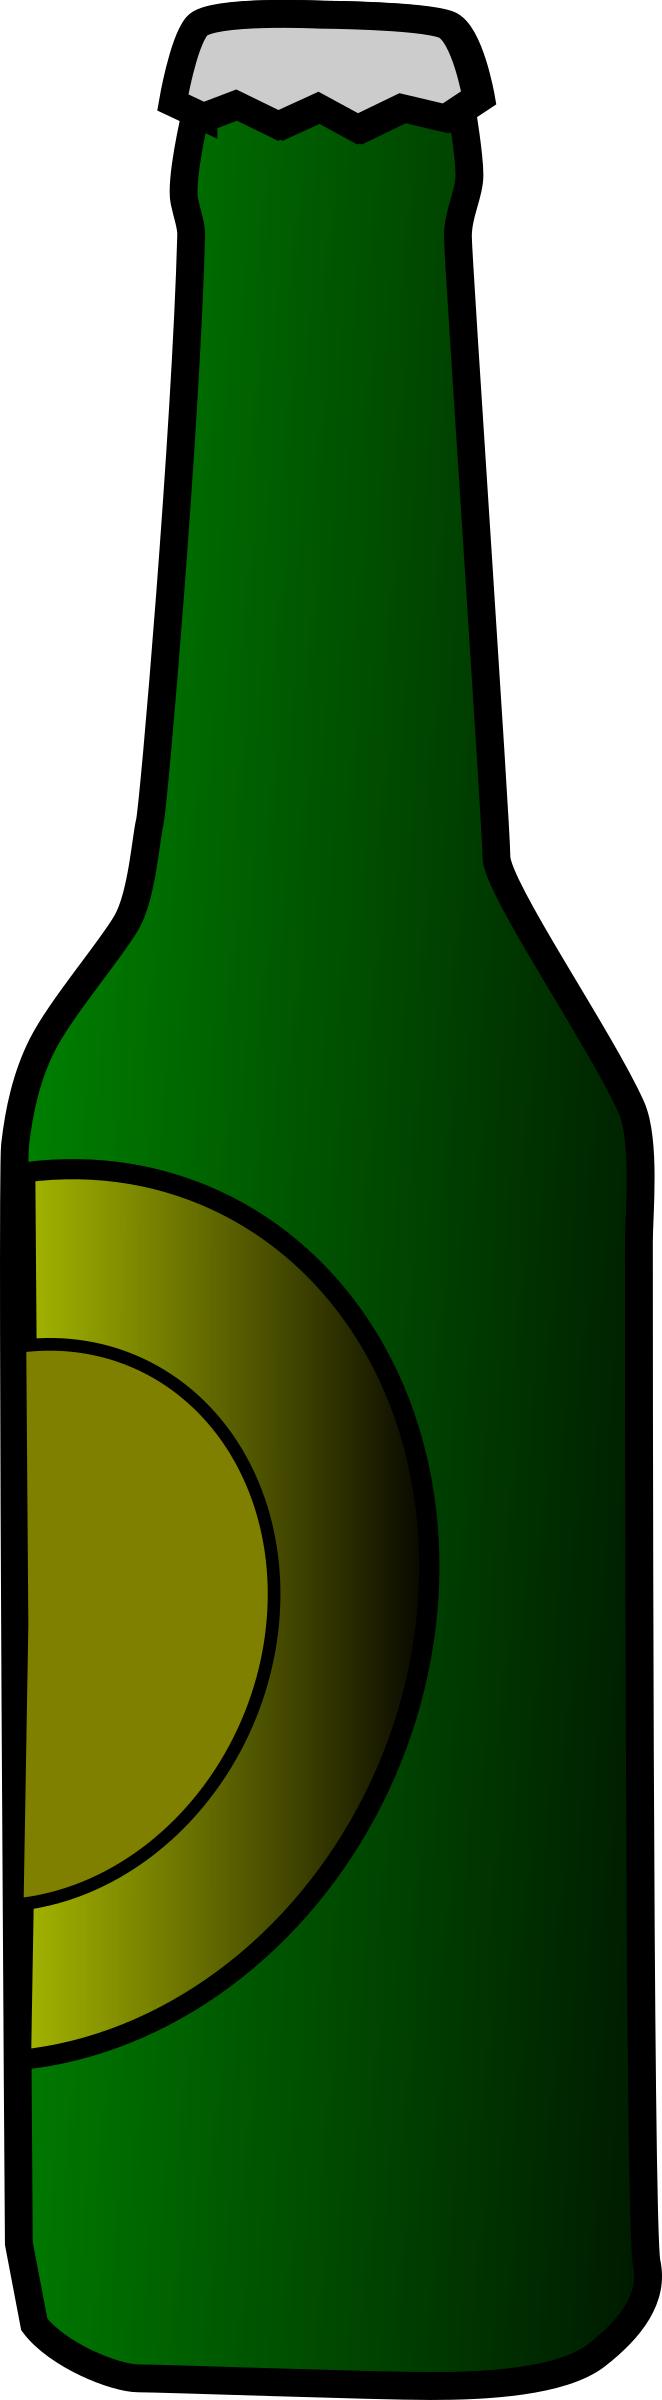 beer bottle PNG icons